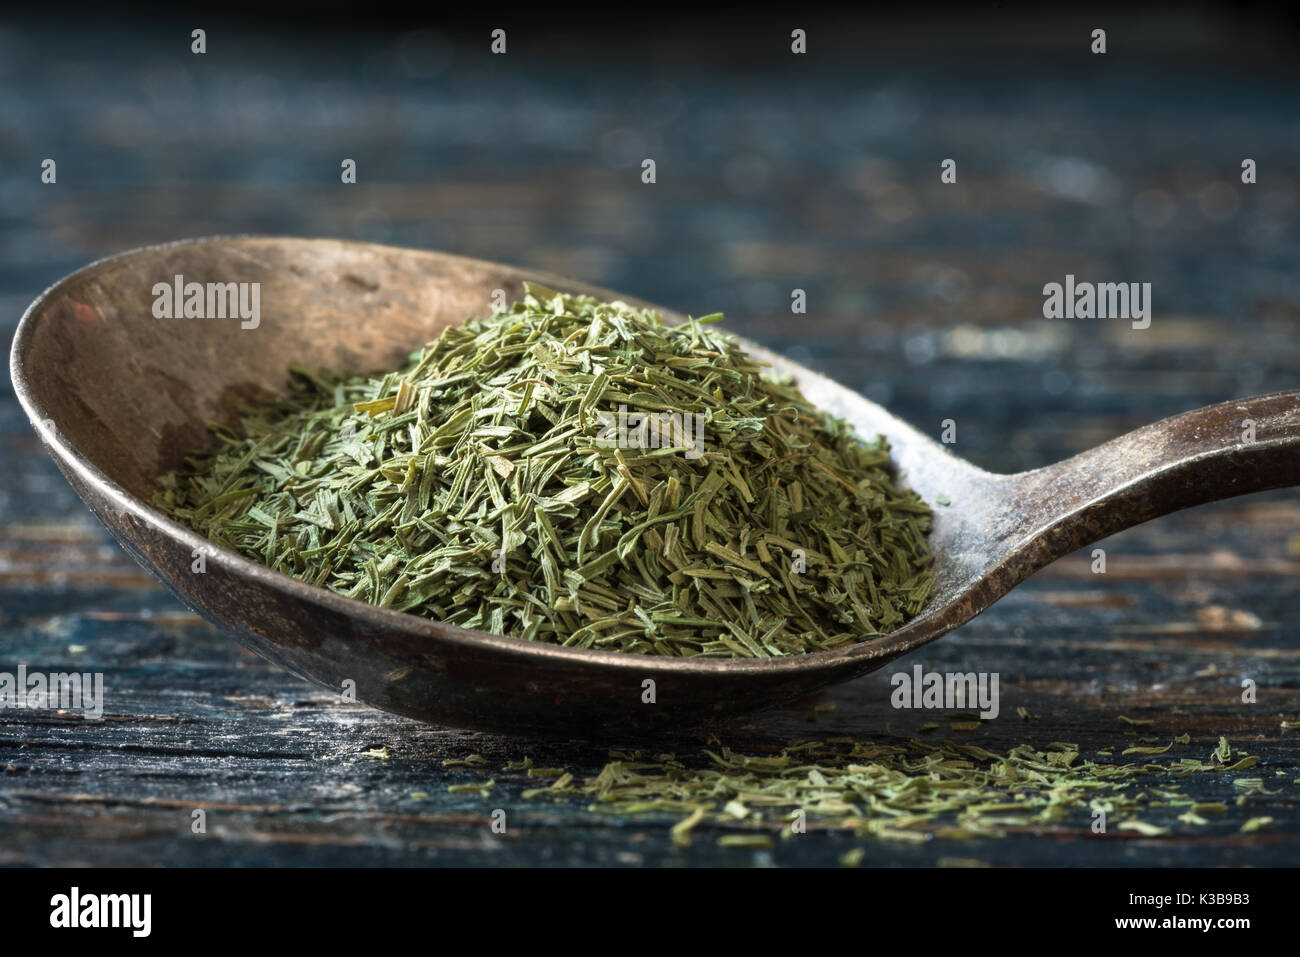 Dill Weed in a Vintage Löffel Stockfoto